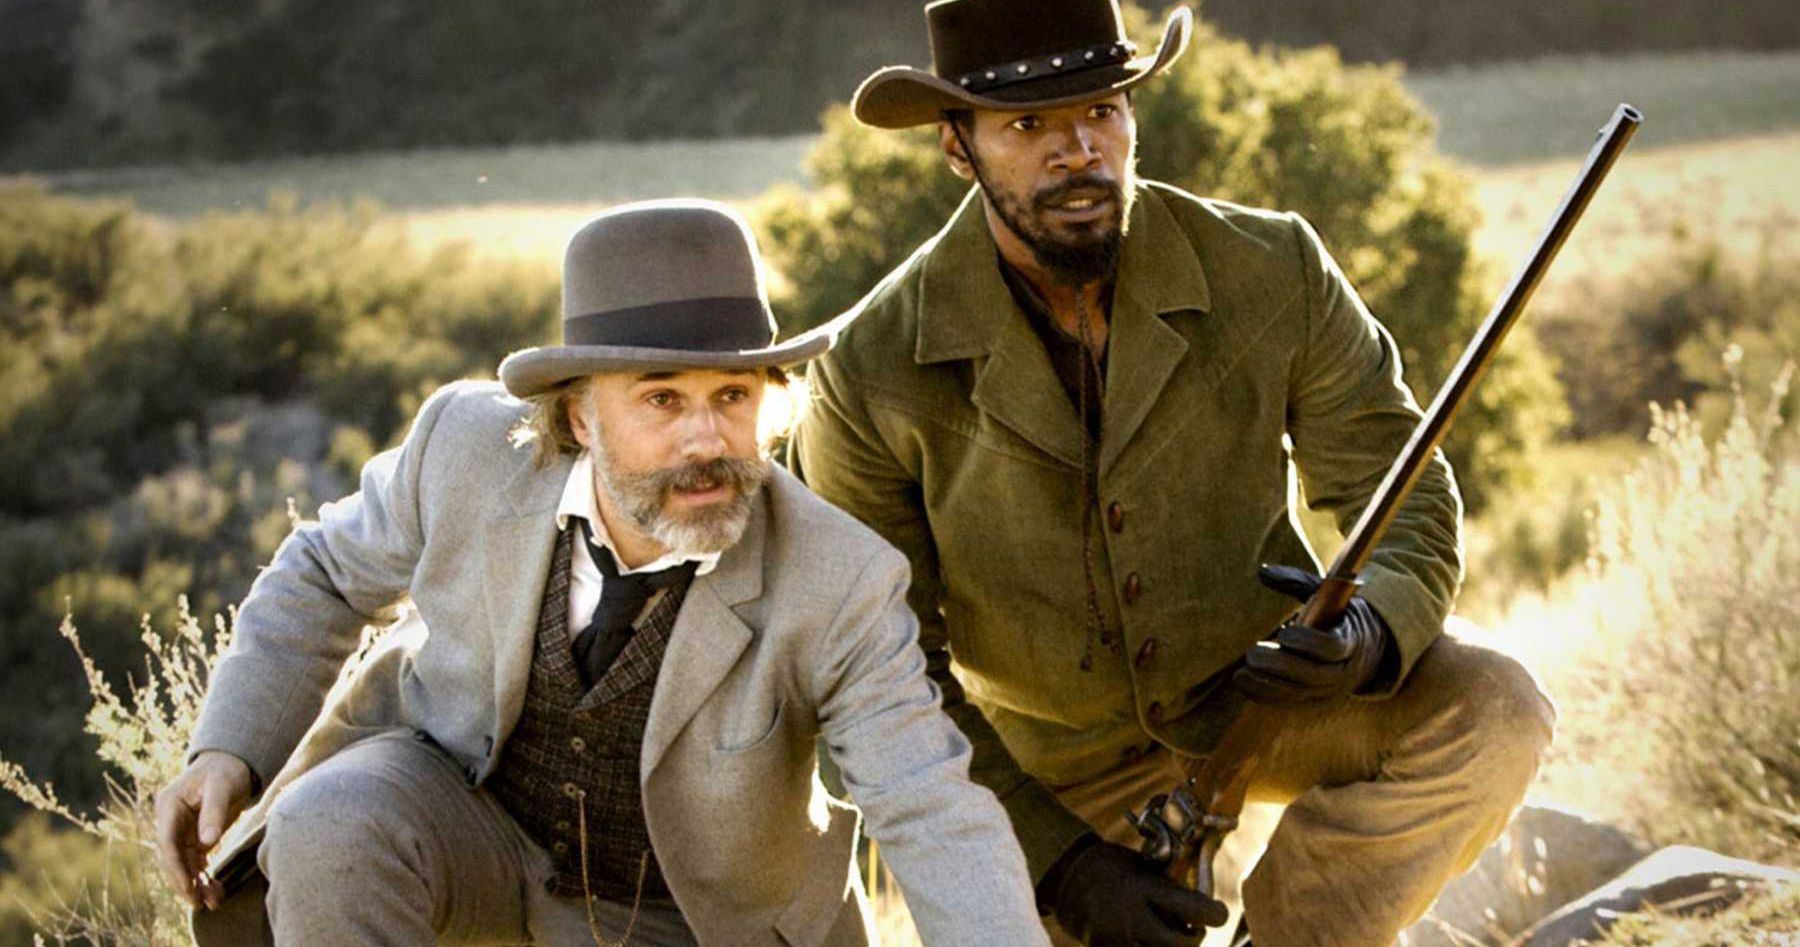 Django Unchained Almost Lost Its Funniest Scene Because Test Audiences Didn't Get It